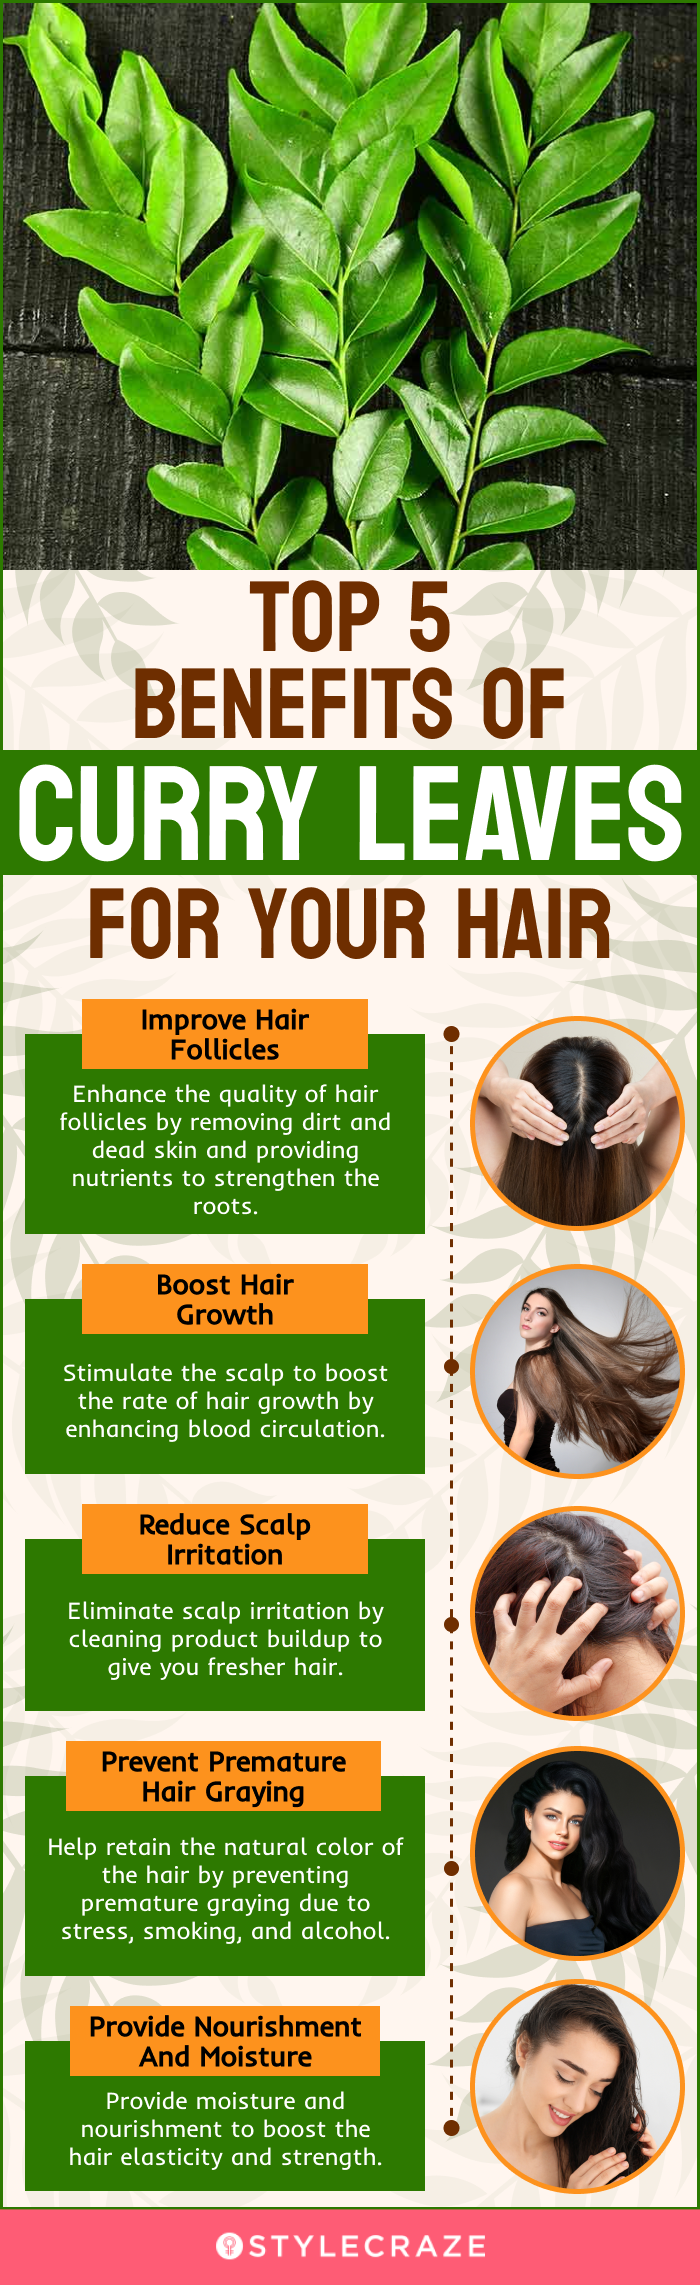 top 5 benefits of curry leaves for your hair [infographic]